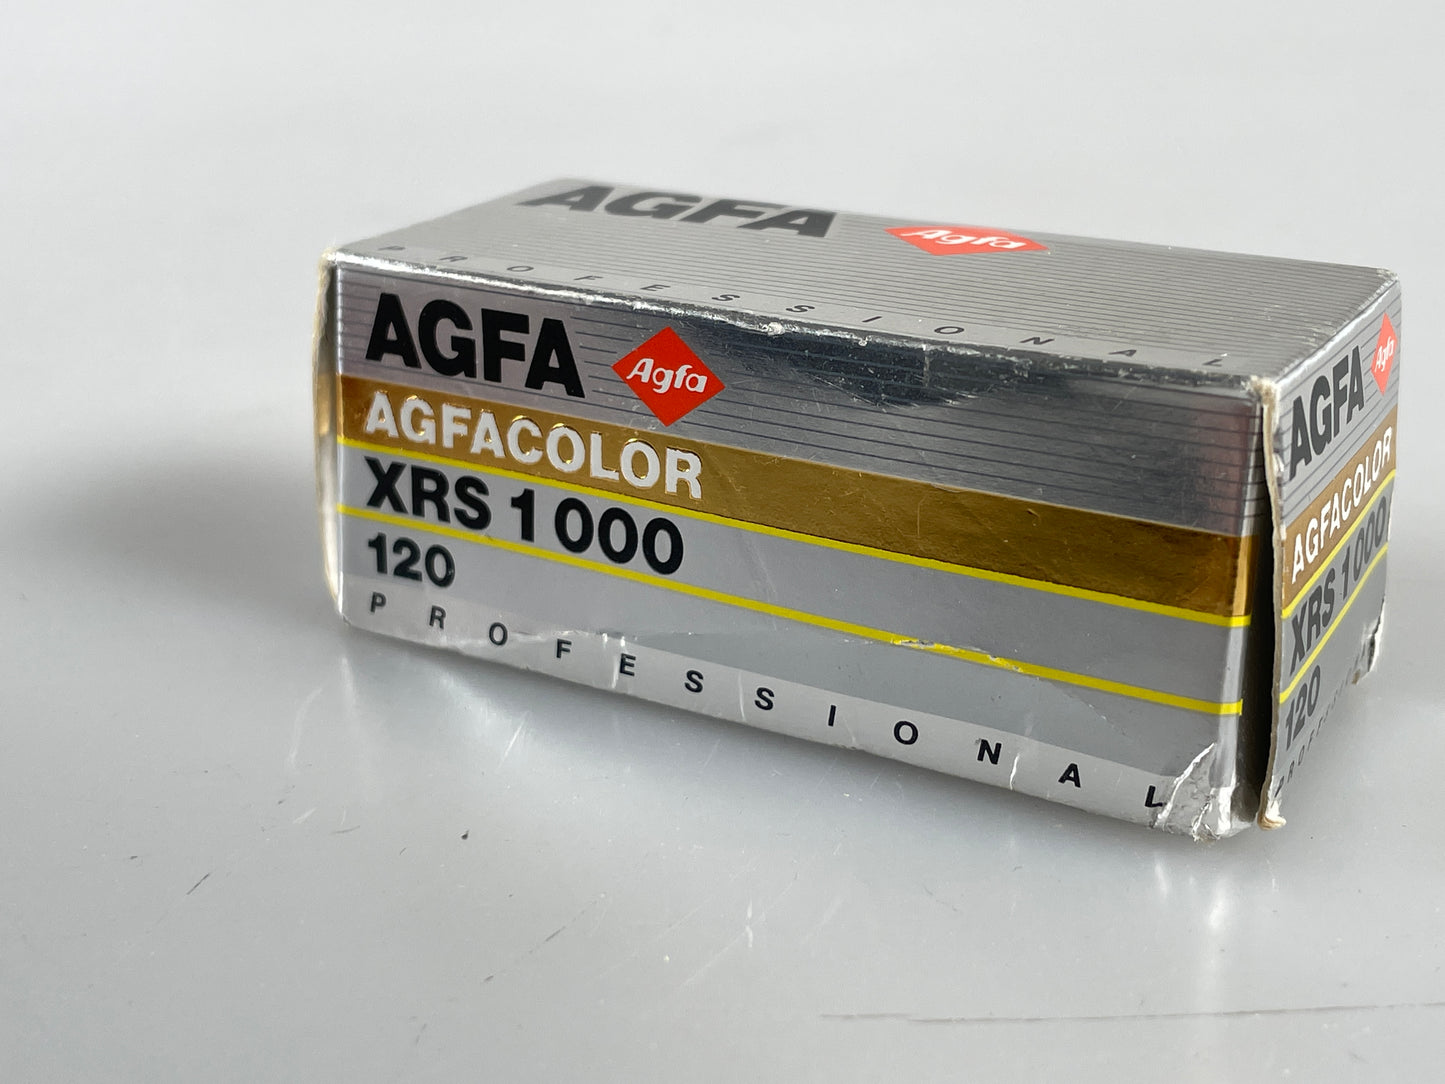 AGFA AGFACOLOR XRS 1000 / 120 Professional 1 Roll expired